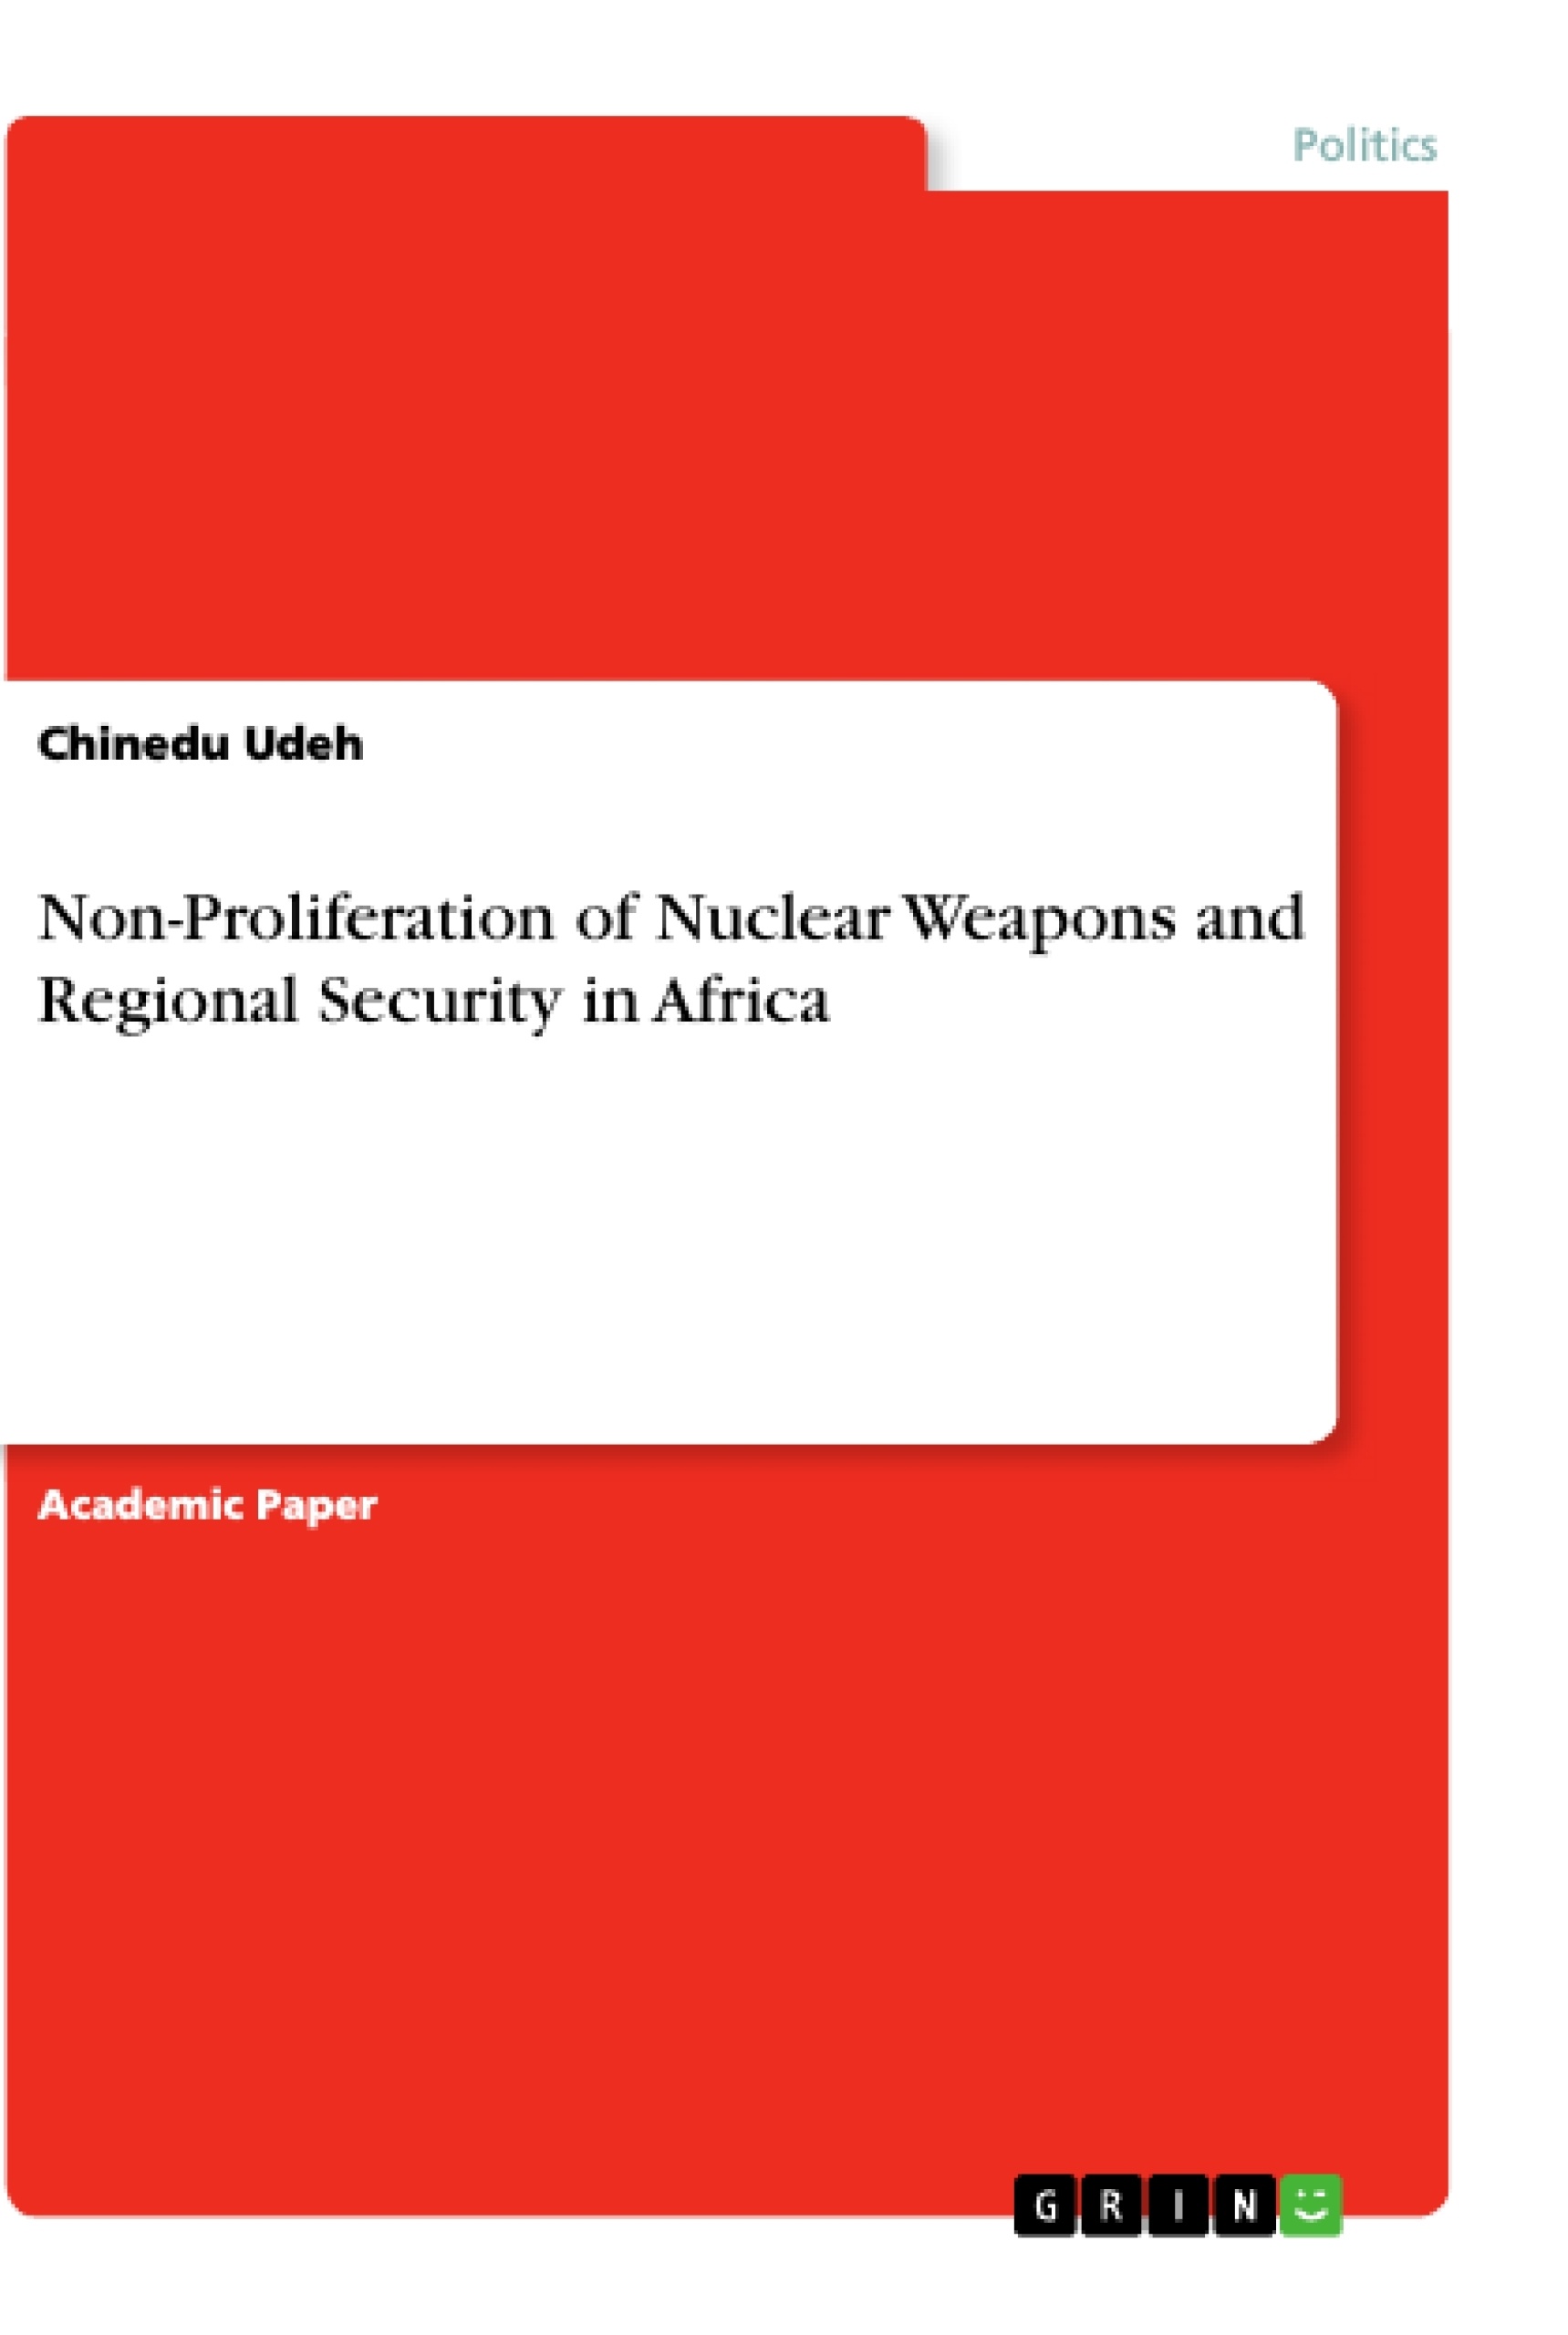 Title: Non-Proliferation of Nuclear Weapons and Regional Security in Africa